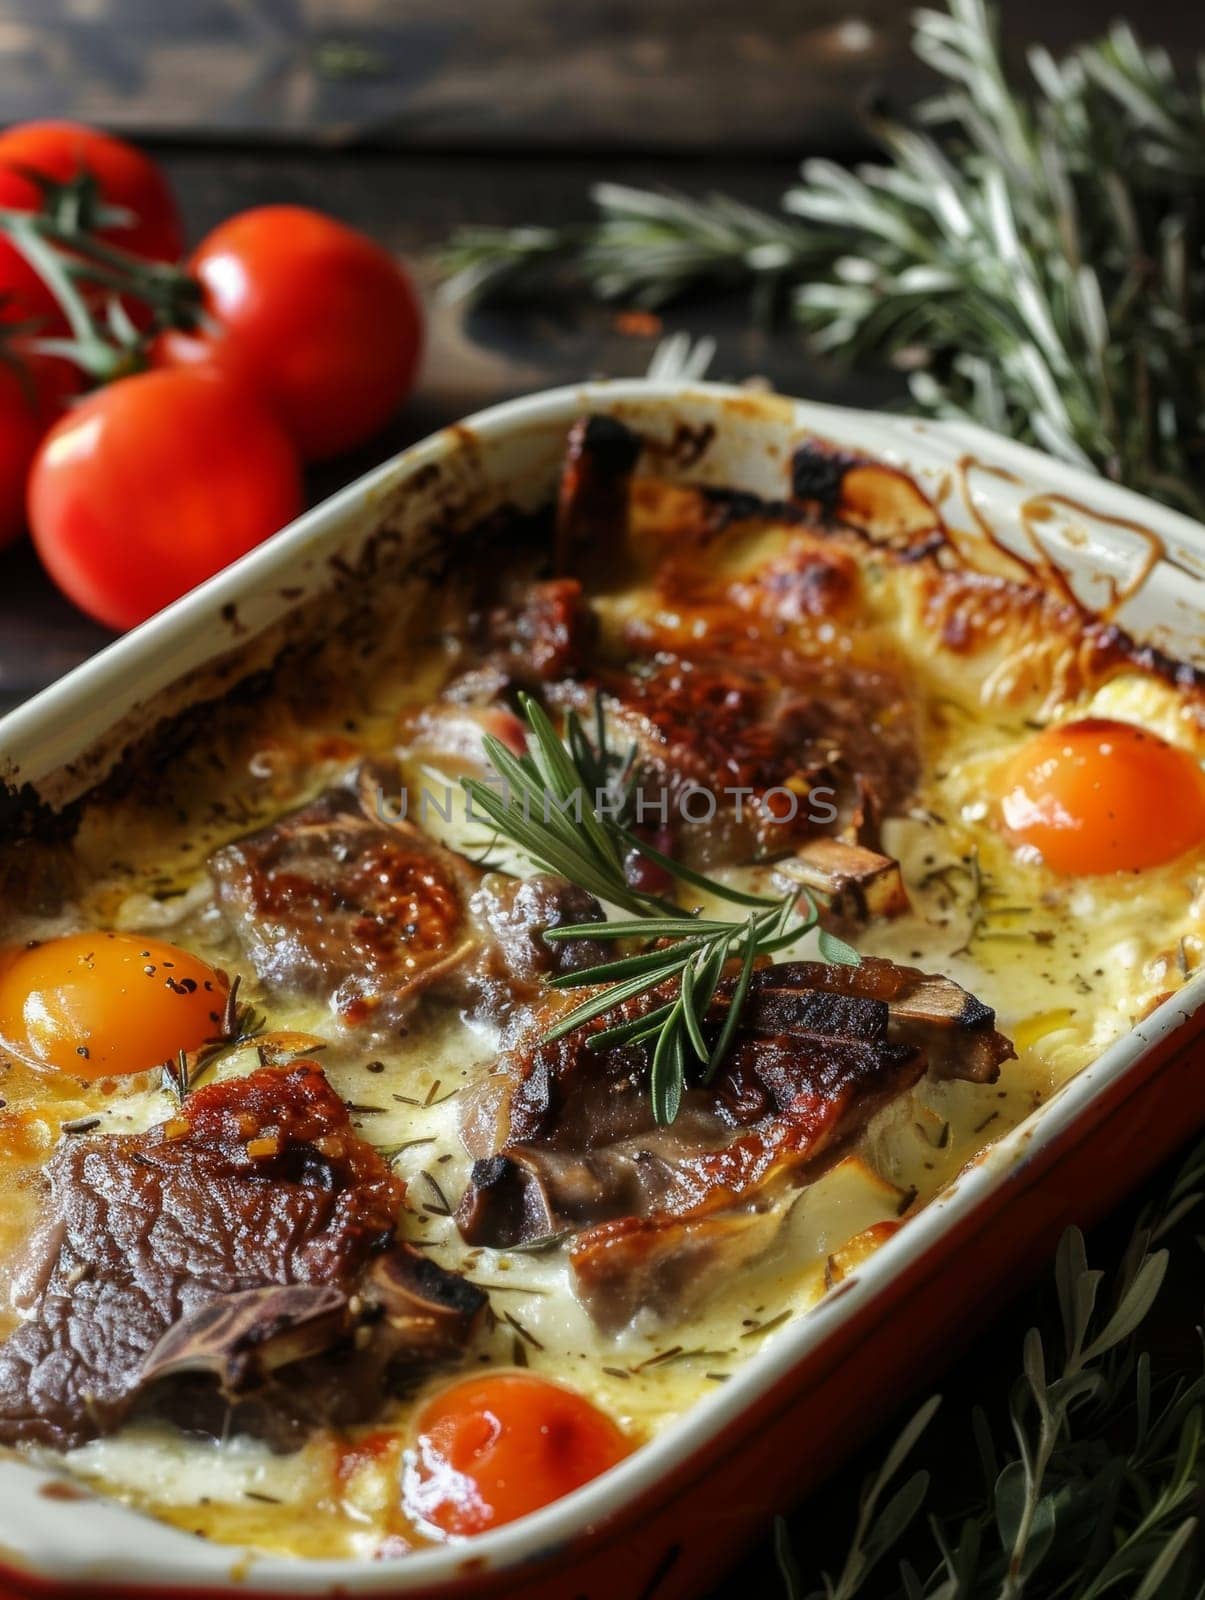 Albanian tave kosi or tave elbasani, dish of lamb baked in a creamy yogurt and egg custard, presented in a baking dish. Comforting traditional Balkan meal reflects unique culinary heritage of Albania